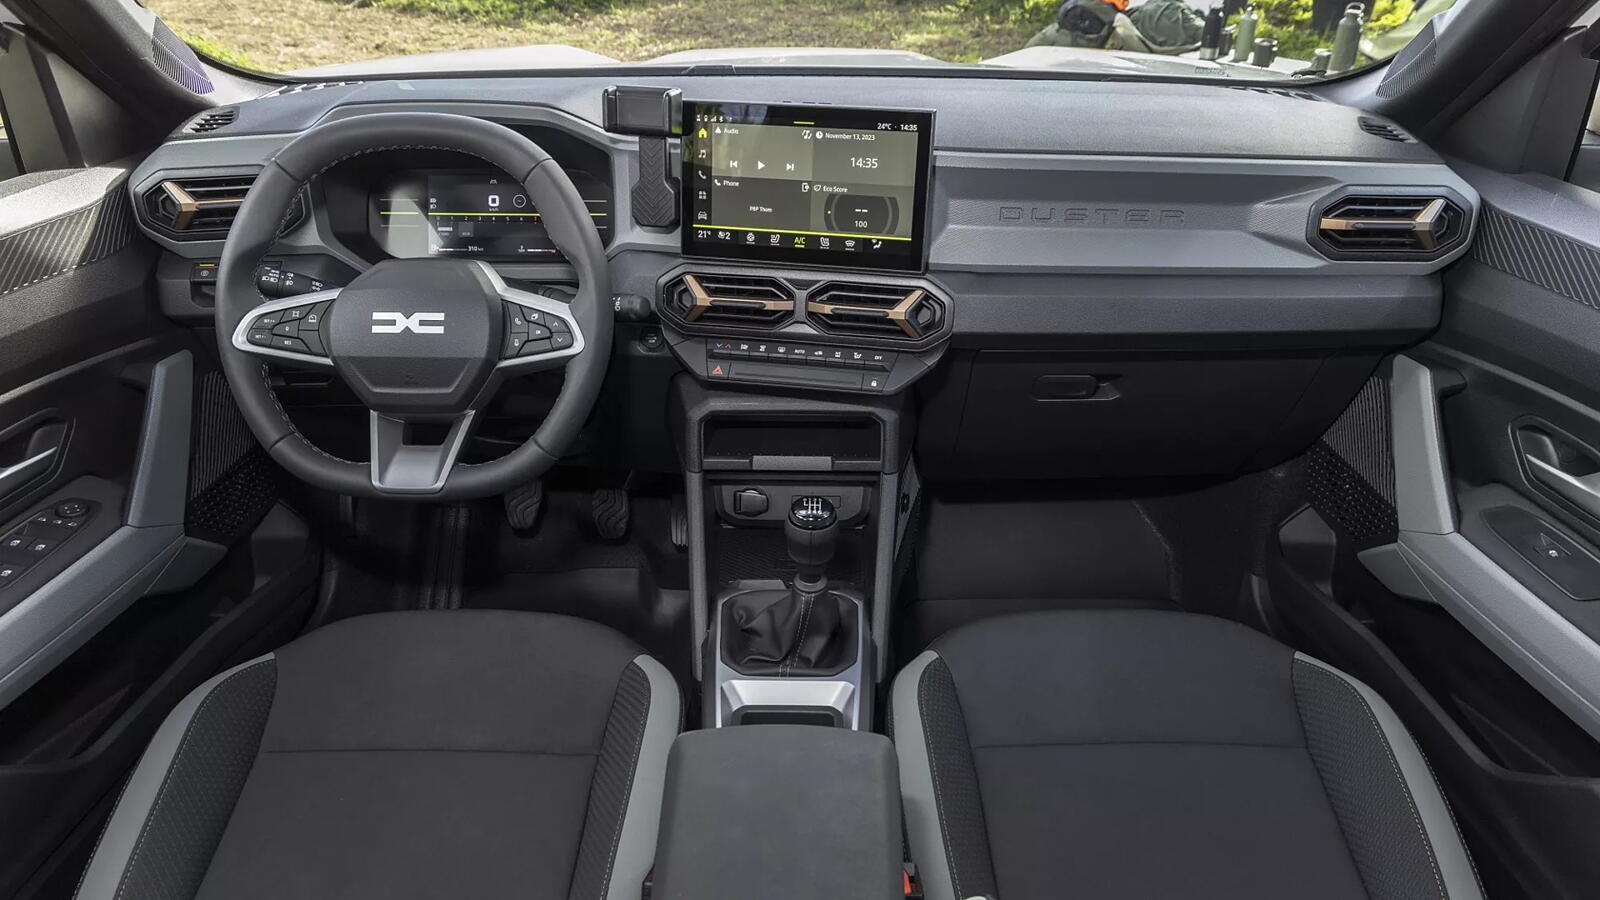 Interior of Duster  Renault duster, New renault, Renault